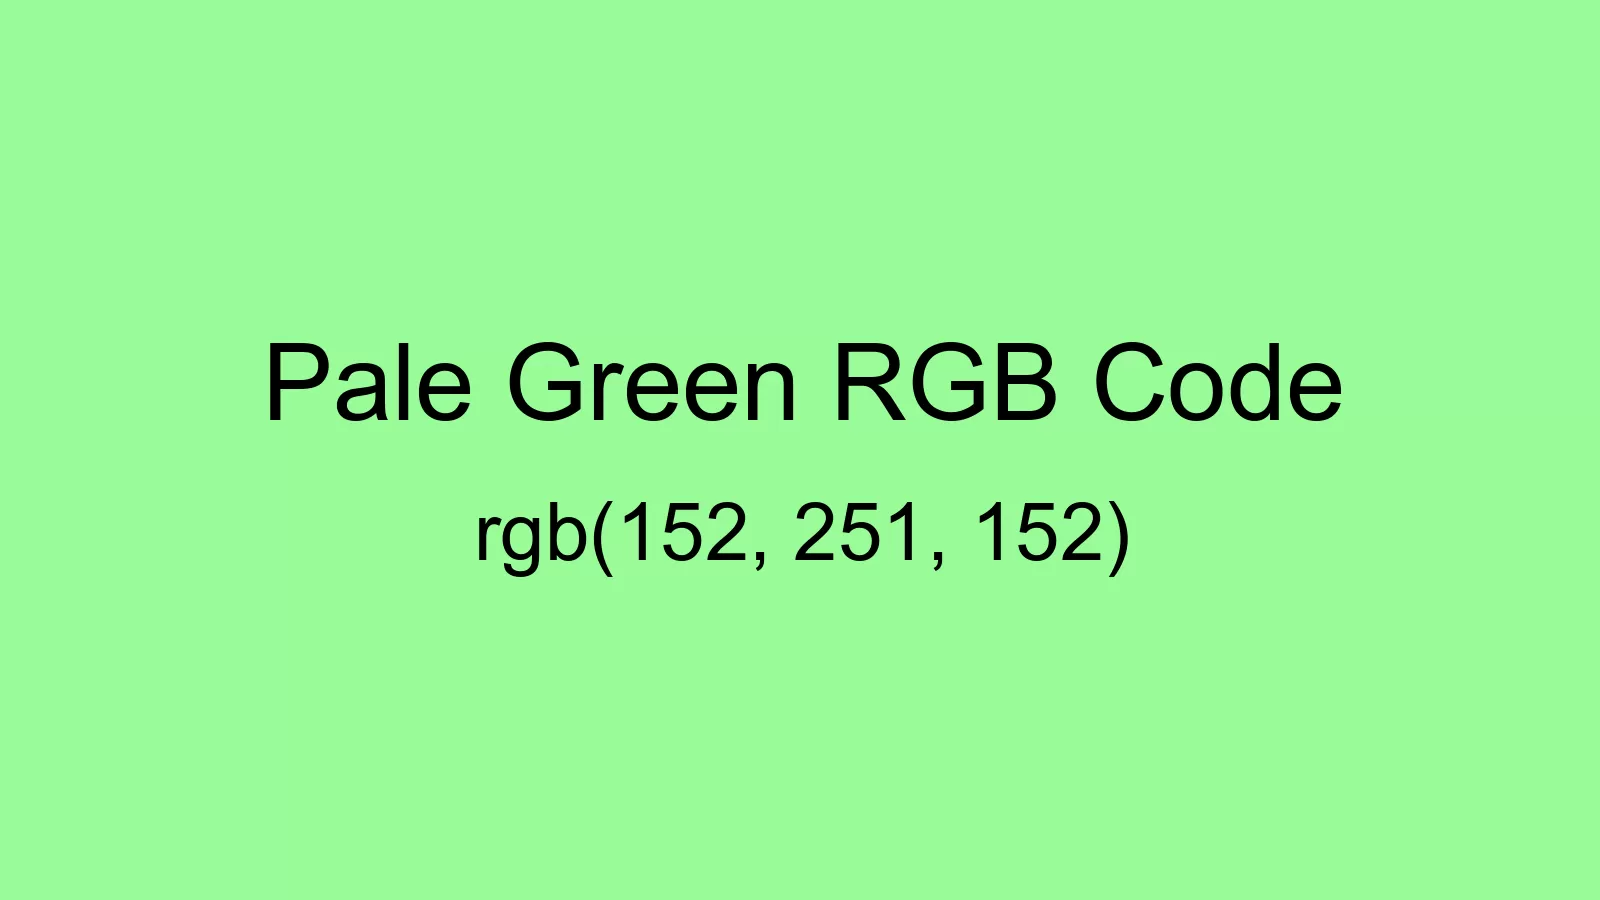 preview image of Pale Green color and RGB code